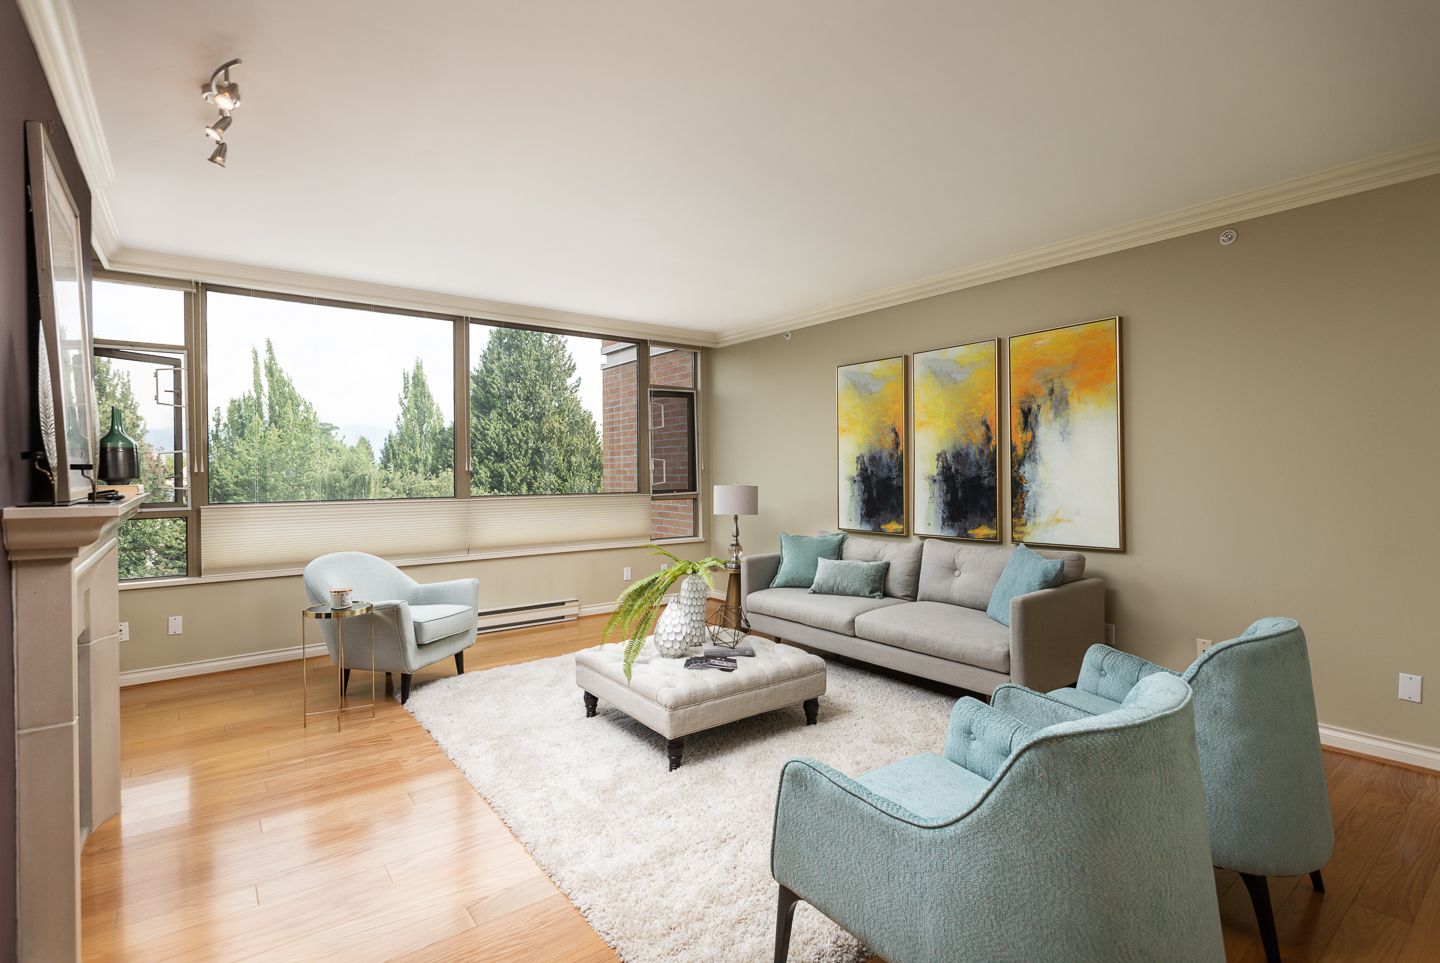 Main Photo: 401-2580 TOLMIE ST in VANCOUVER: Point Grey Condo for sale (Vancouver West)  : MLS®# R2397003